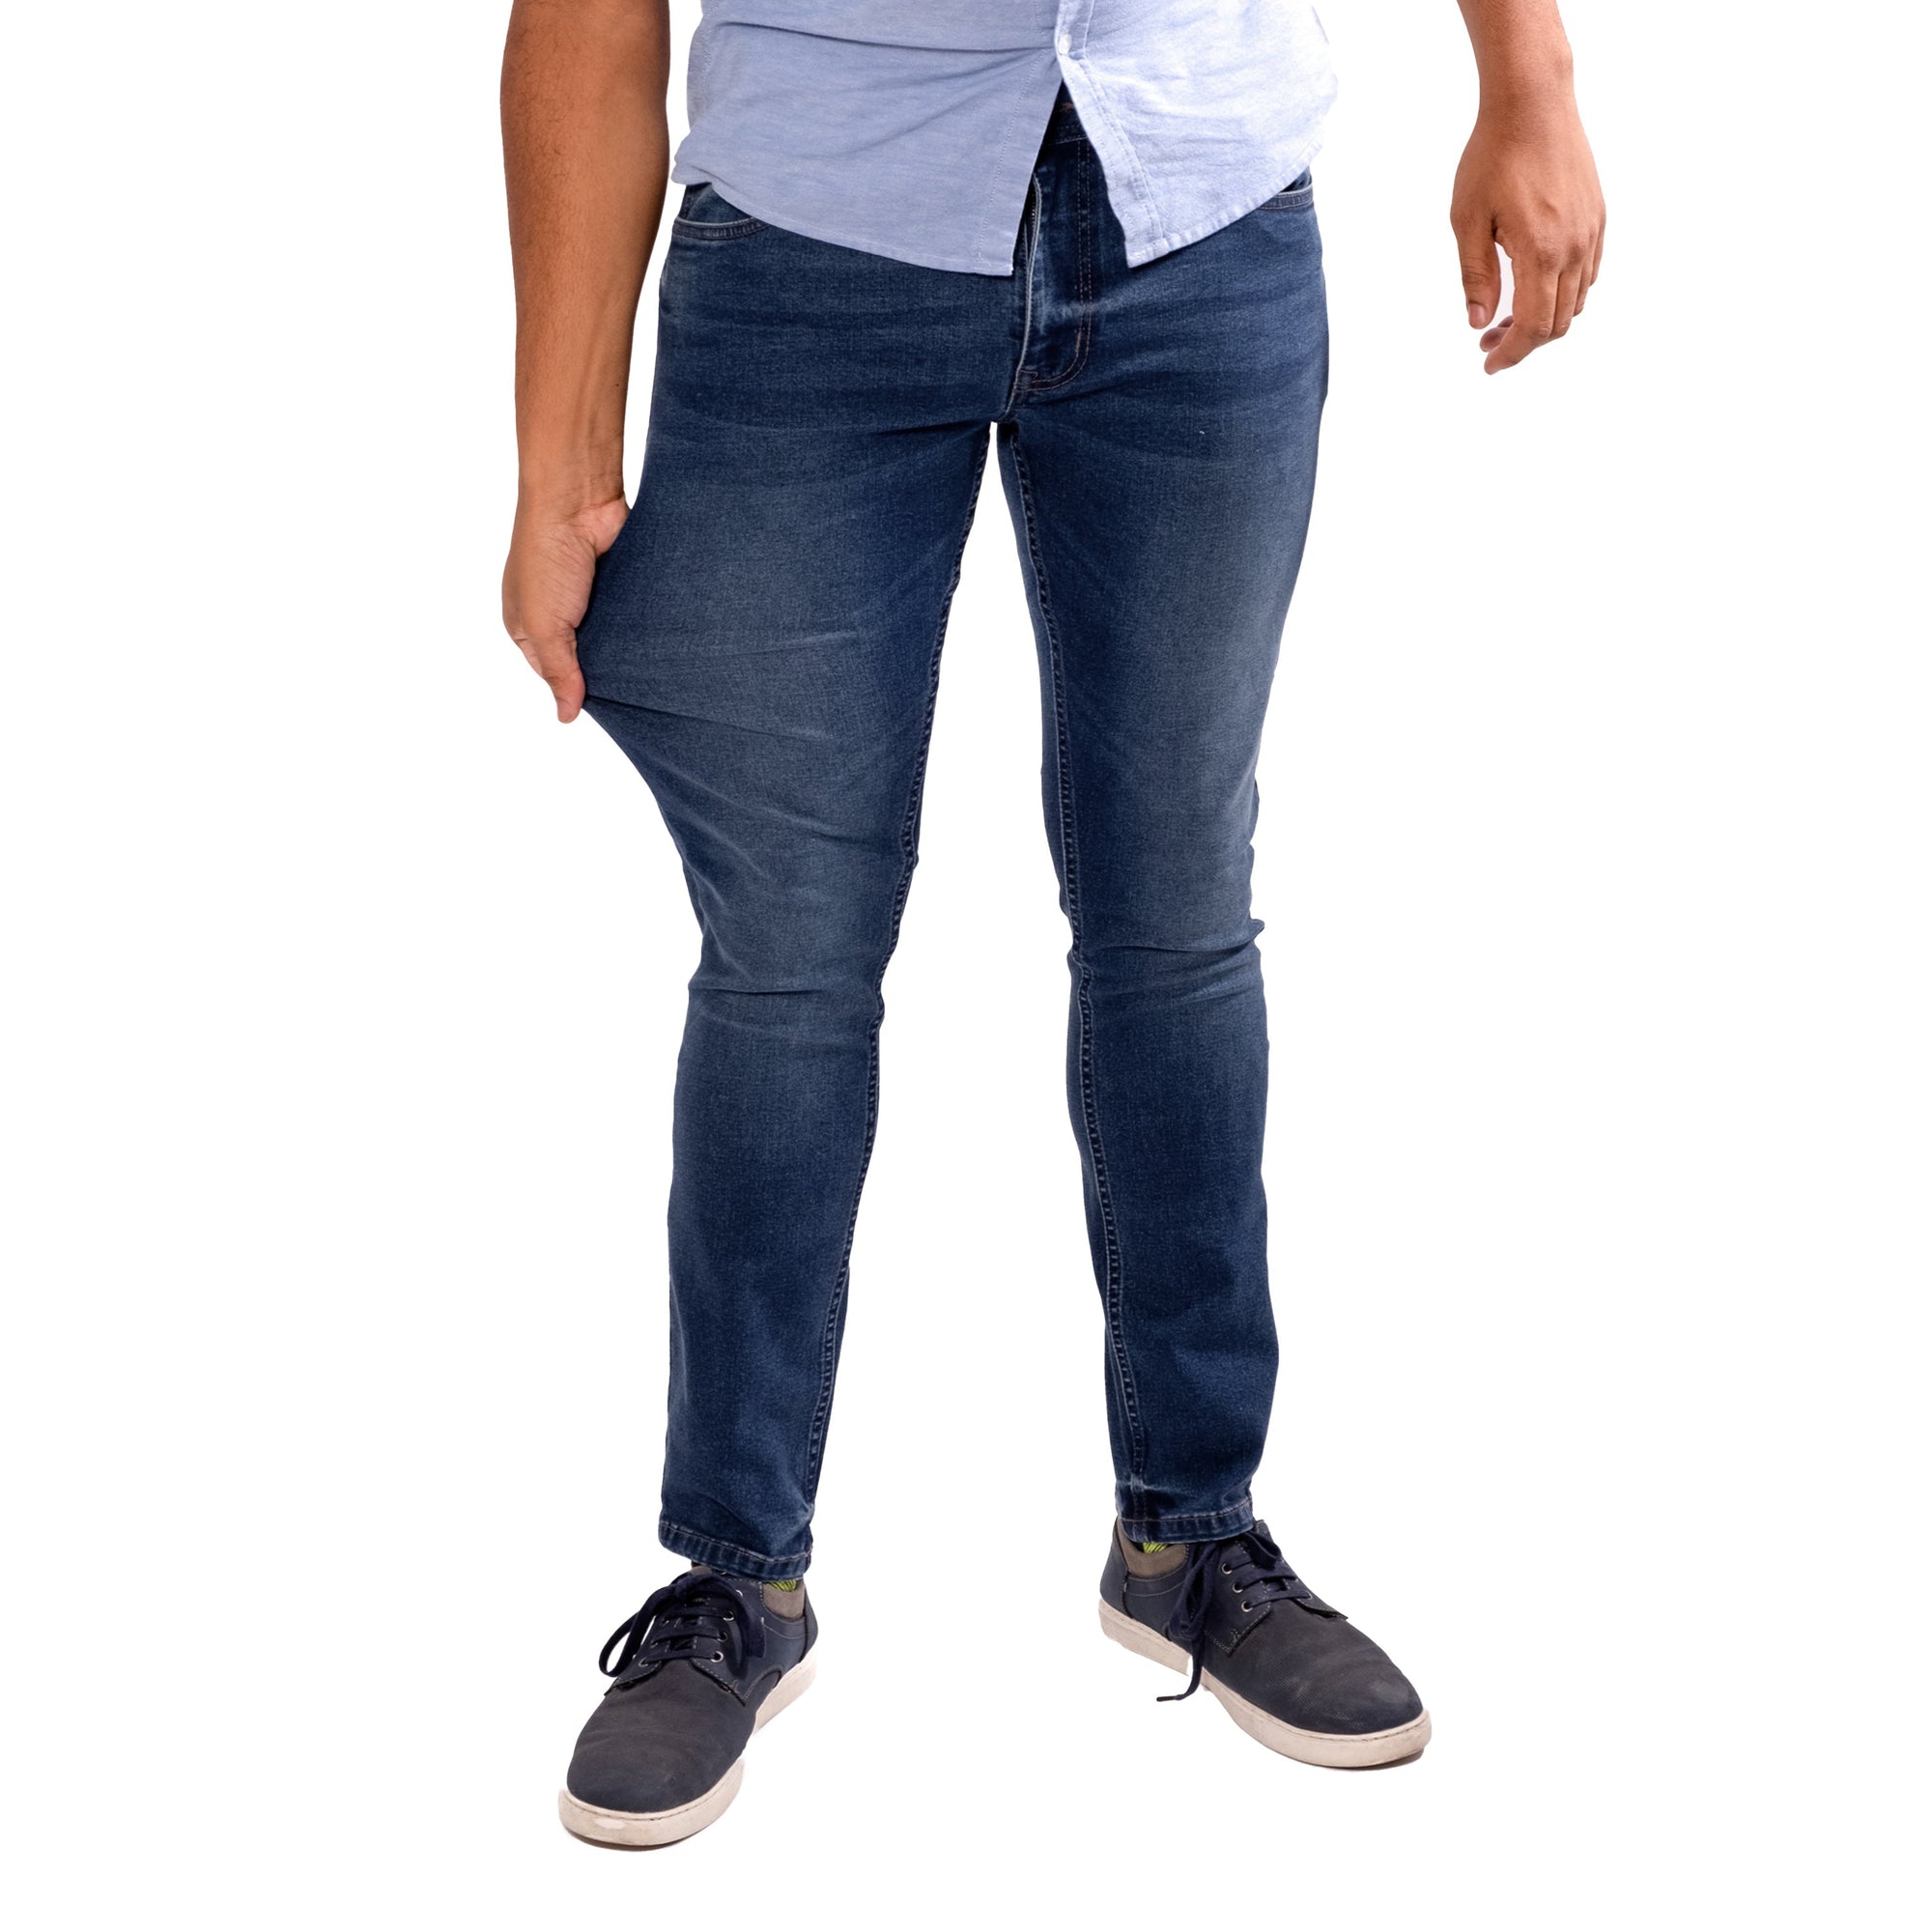 Skinny Fit / The Jean | Perfect Jeans Blue Medium Admiral 